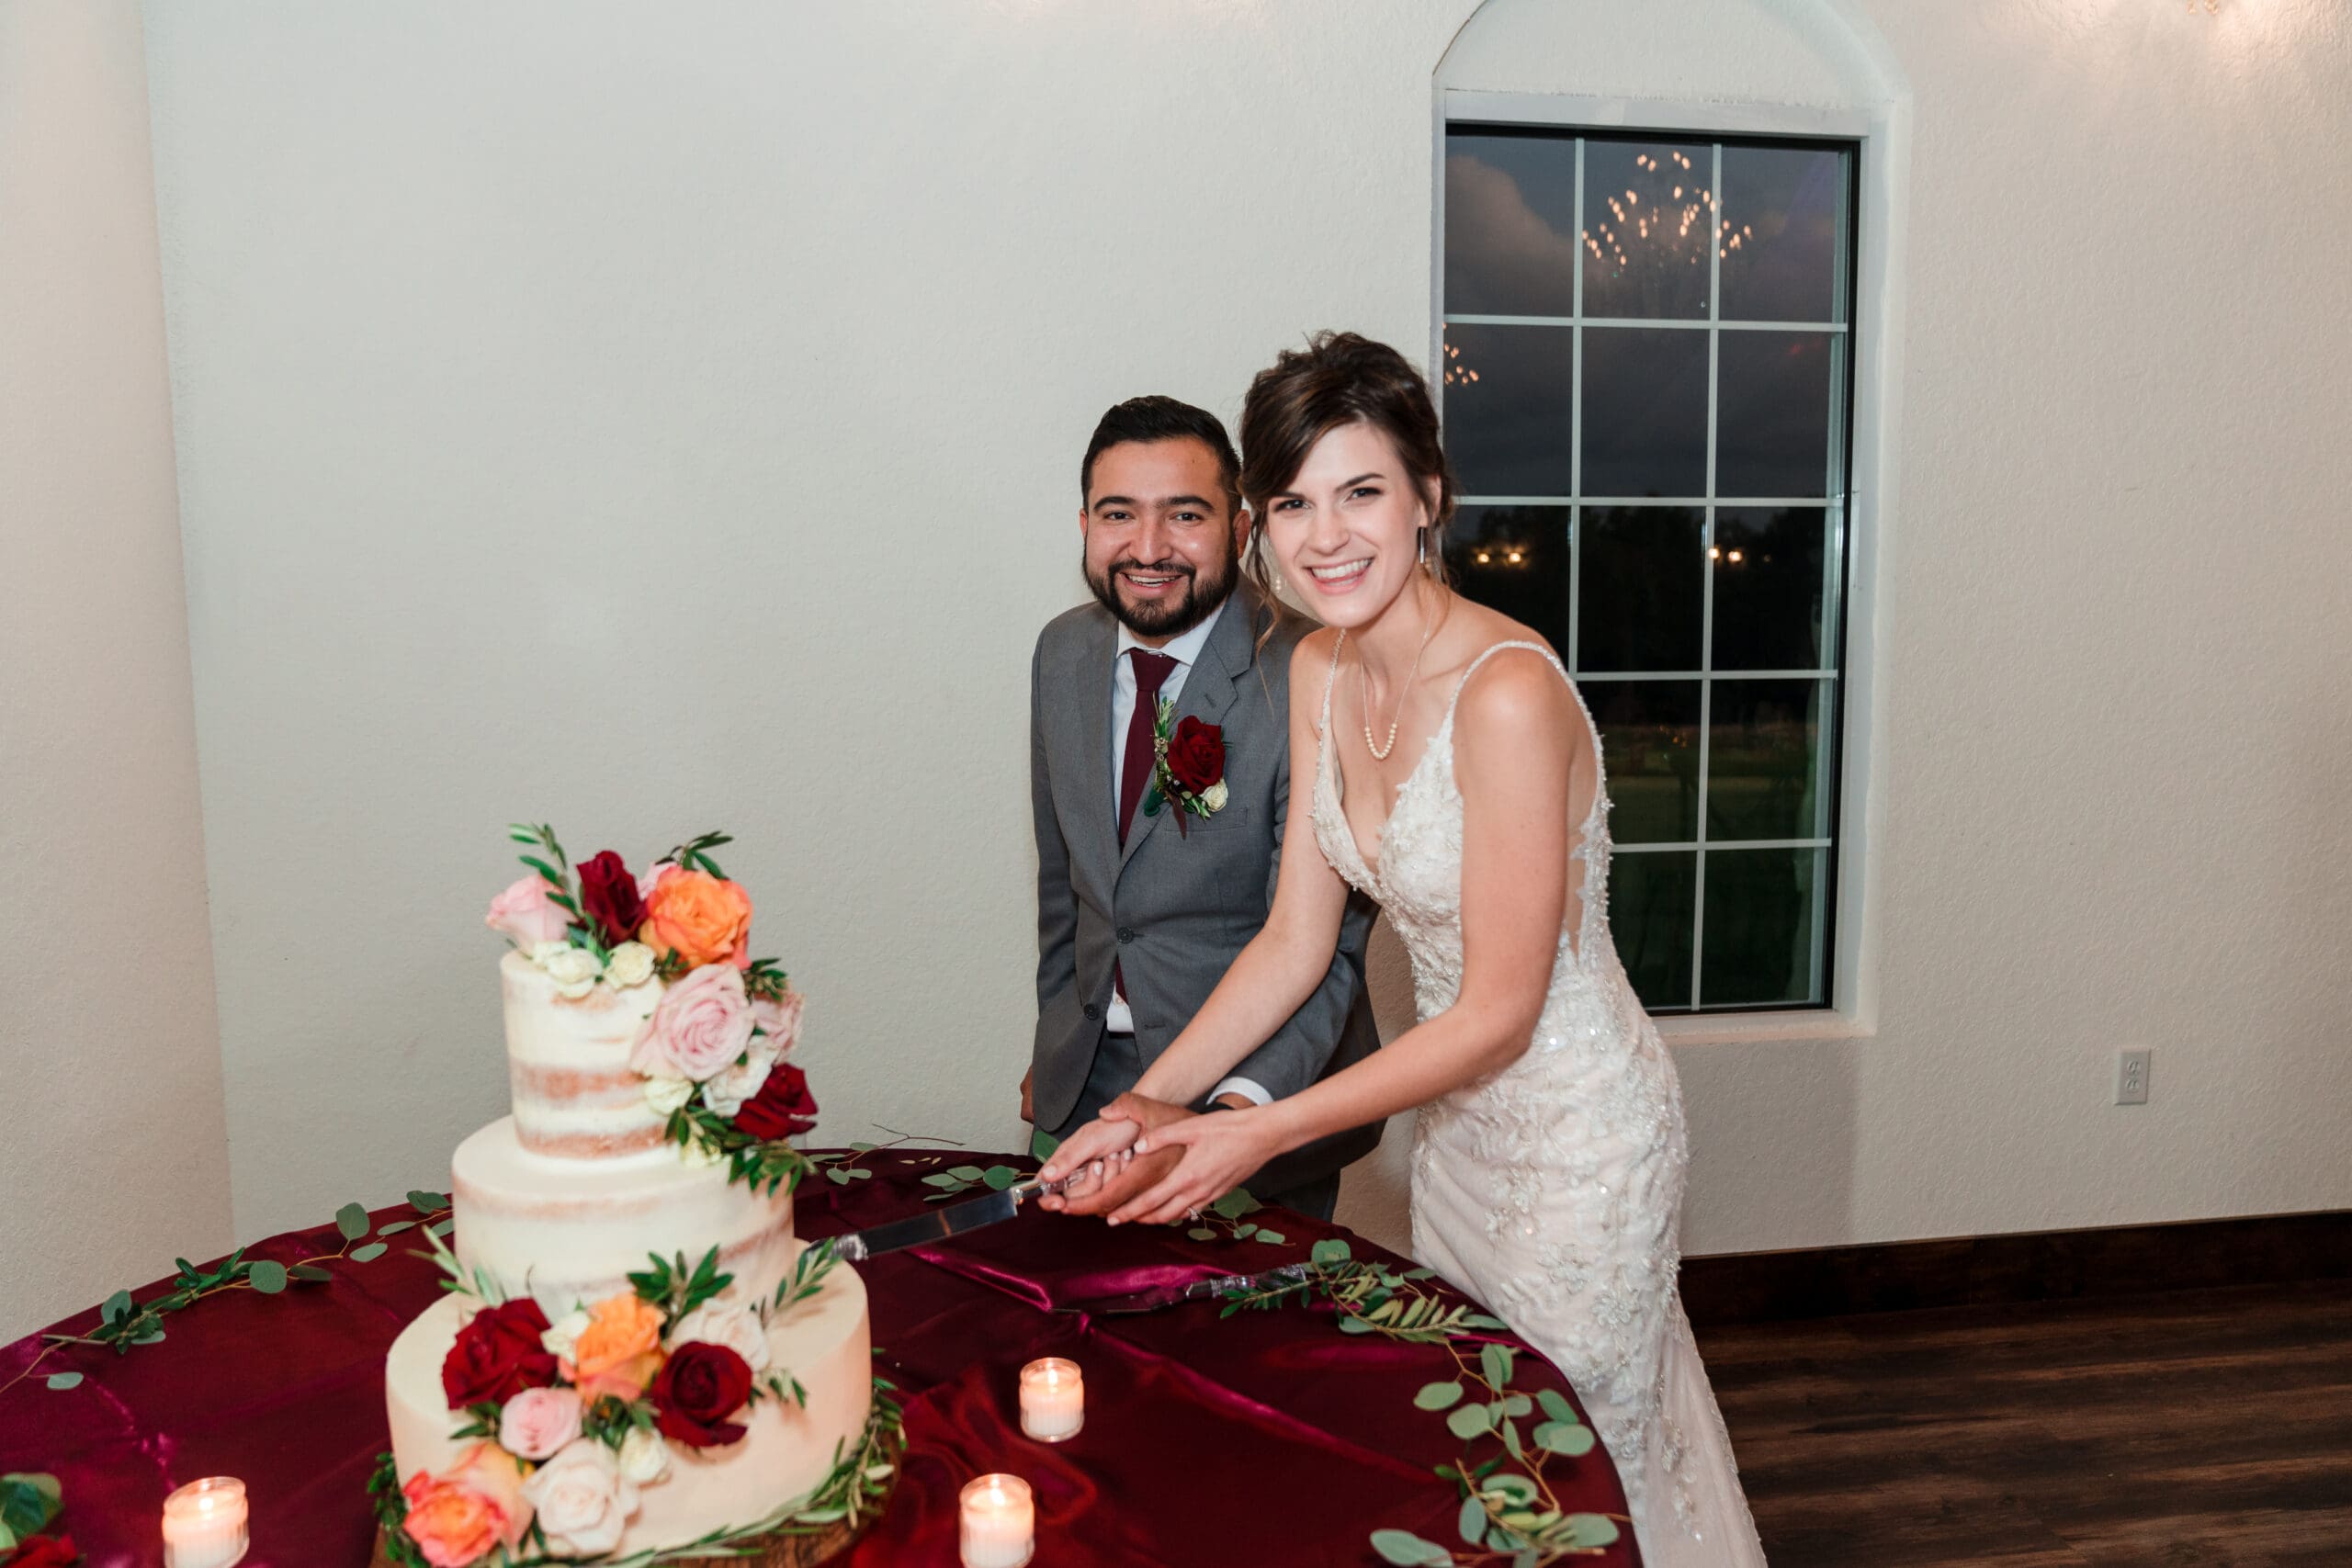 Bethany and Jonah smiling as they make the first cut in their wedding cake, surrounded by guests, during their reception at the Sterling Event Venue Reception Center.